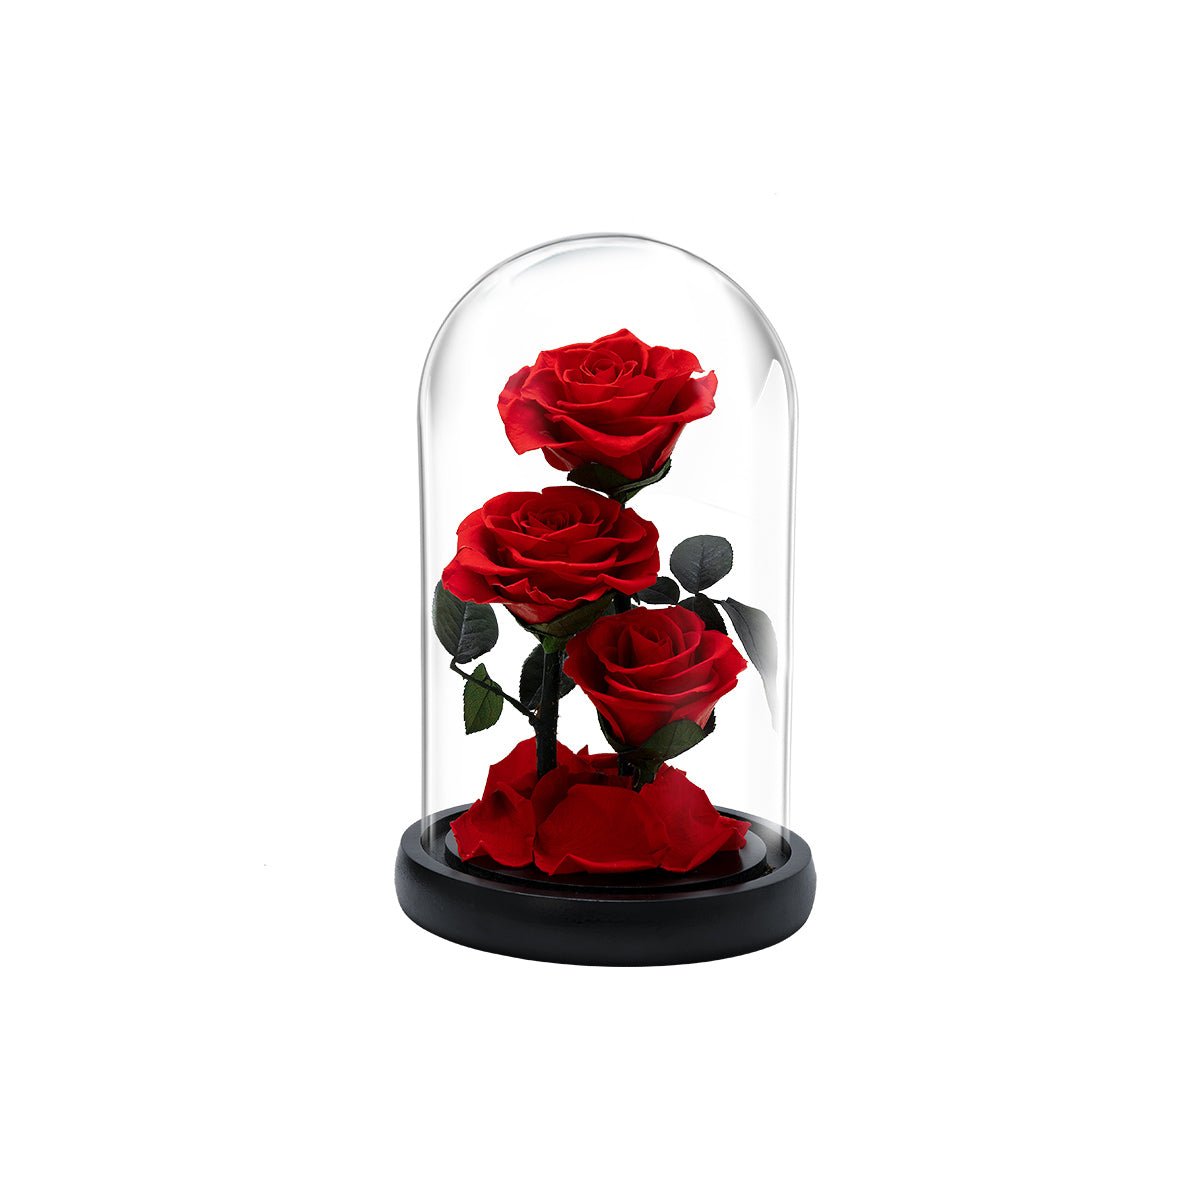 &quot;Through Three Lifetimes, I Only Love You&quot; Eternal Rose Flowers Gift - 0cm